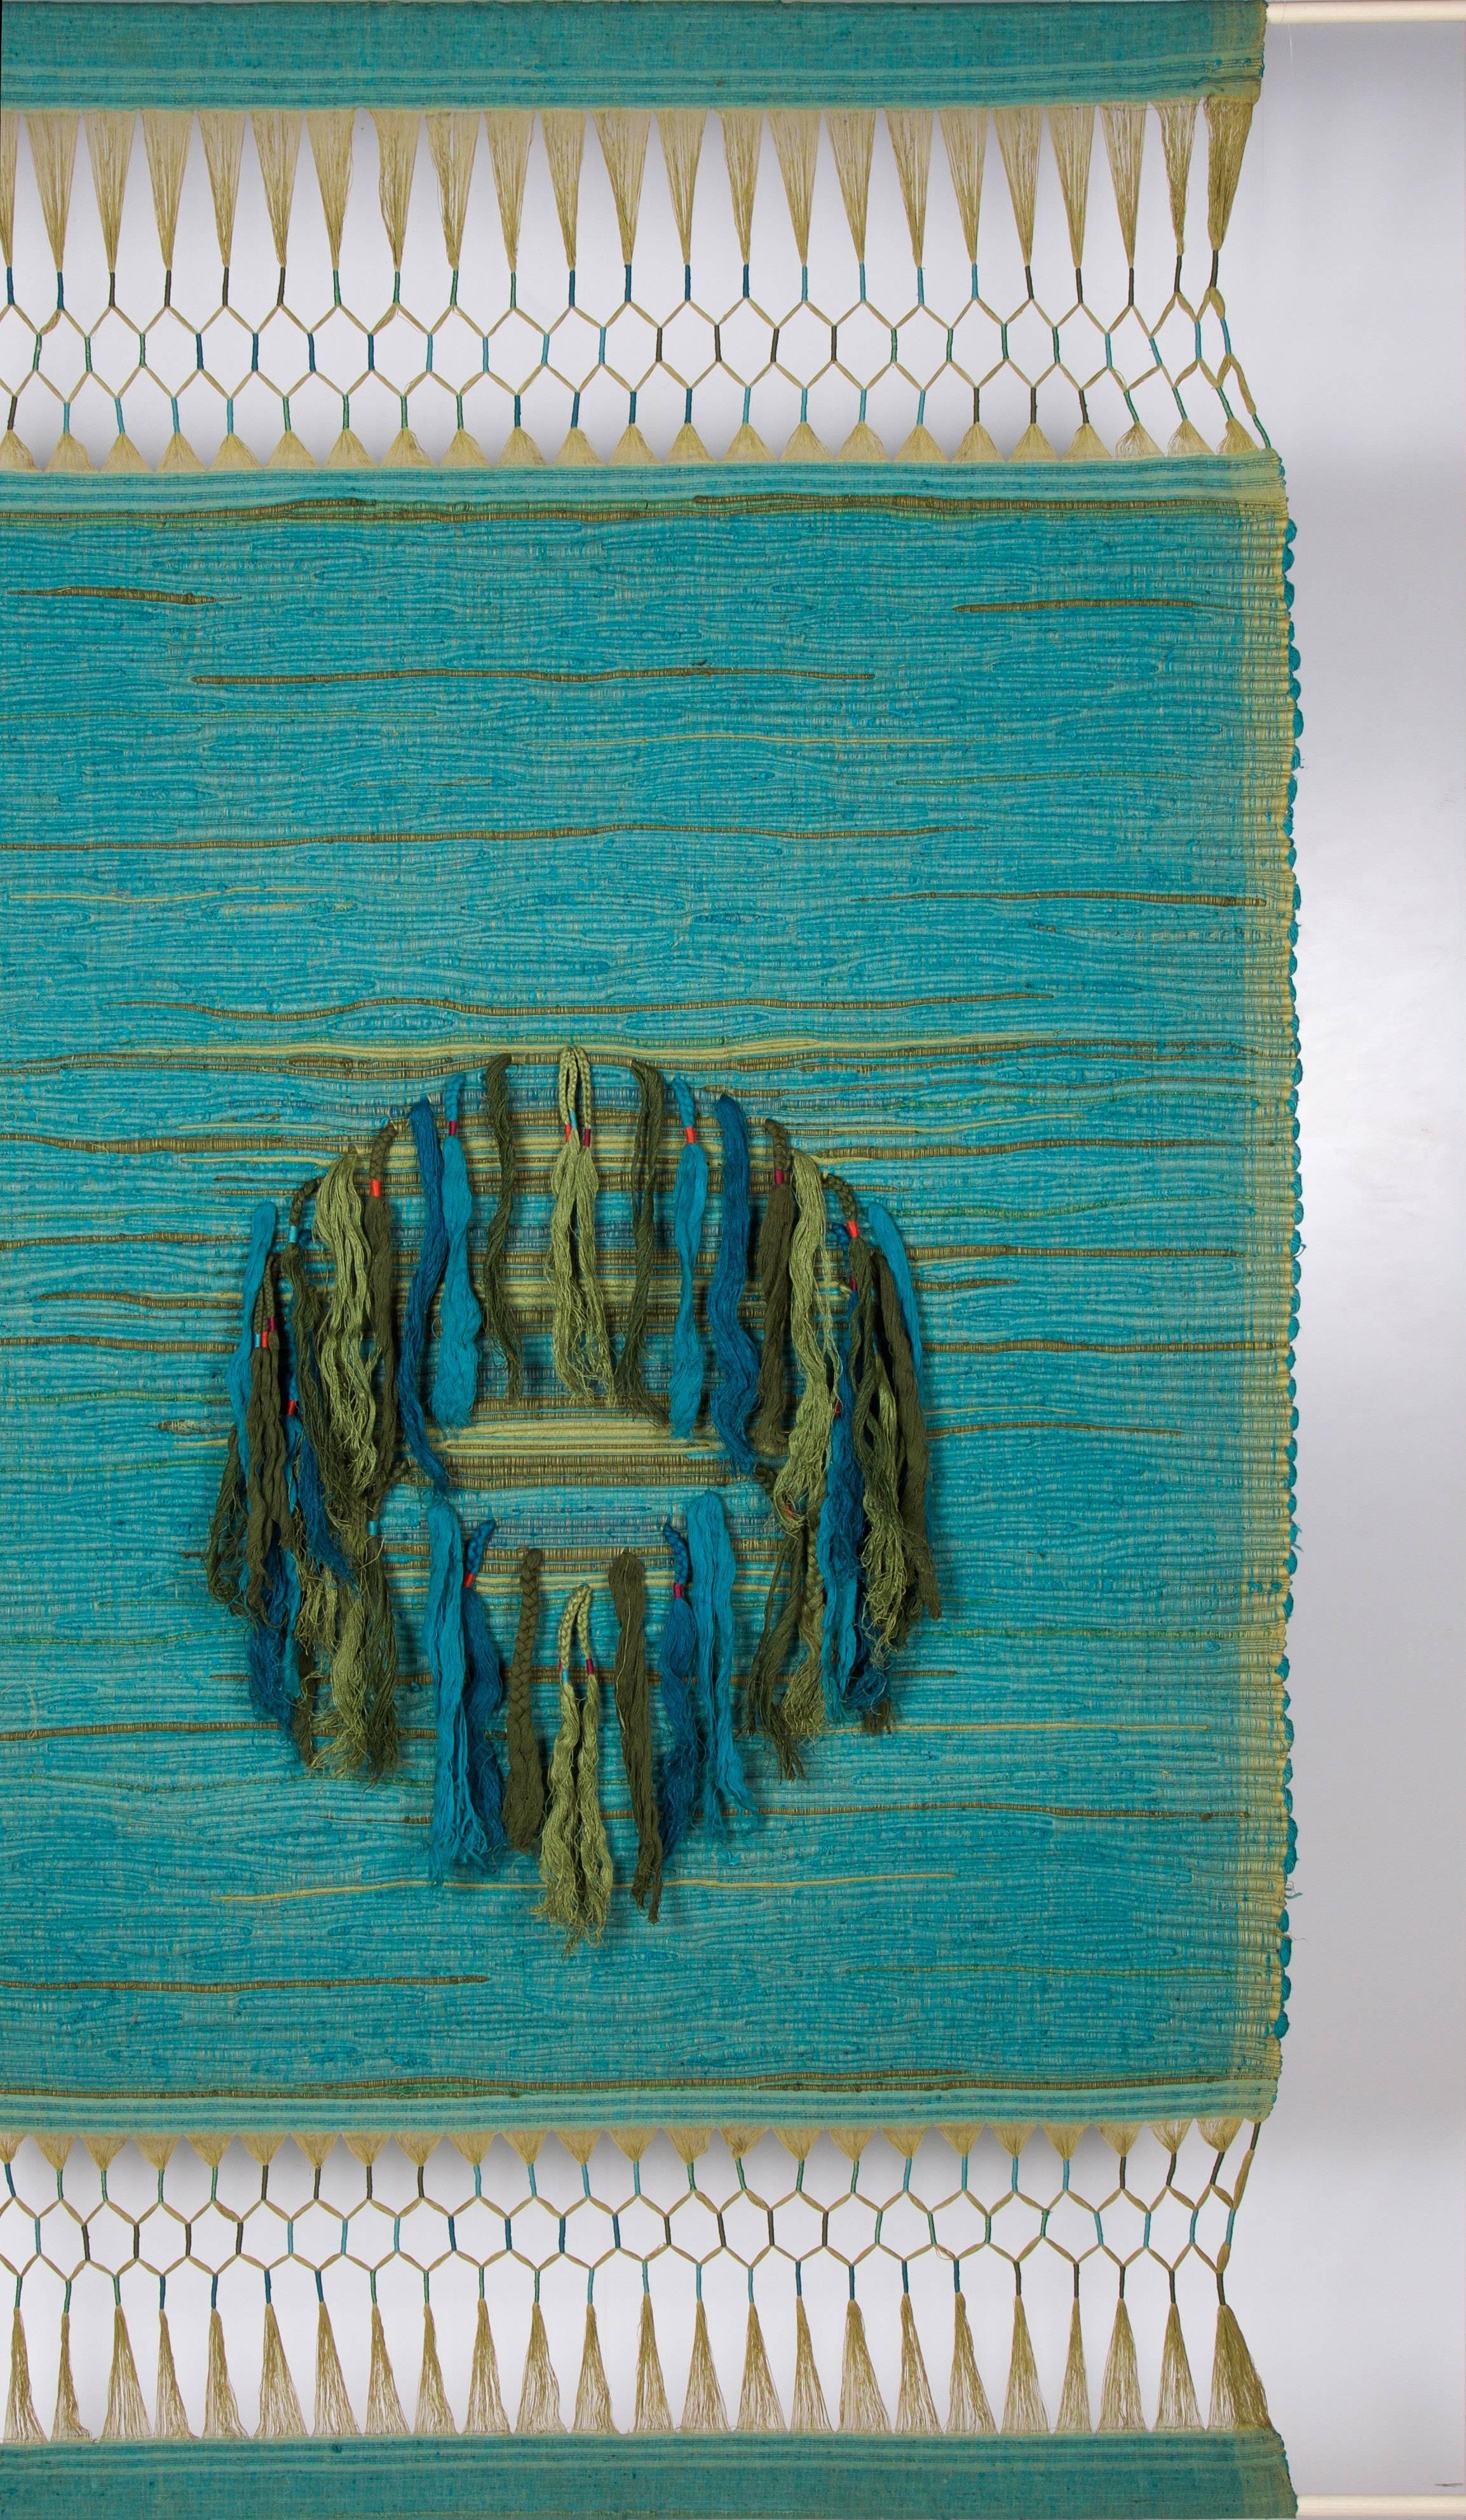 Mid-20th Century Sheila Hicks, Palghat Tapestry, India, 1966